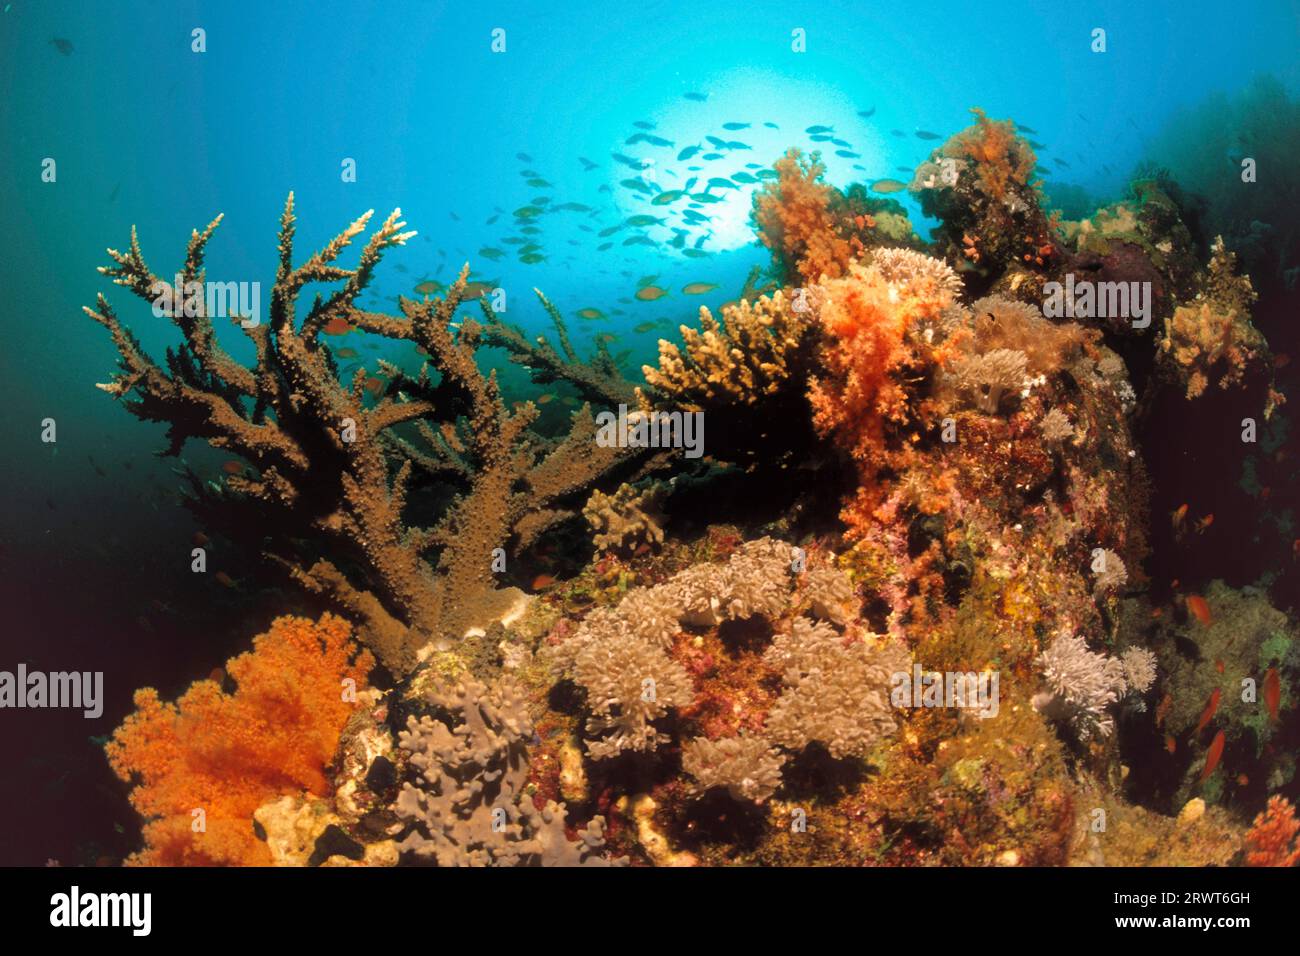 Coral garden with diffrerent kinds of hard coral (Acropora)and soft corals, Dendronephthya sp., Ari Atoll, Maldives, indian ocean Stock Photo